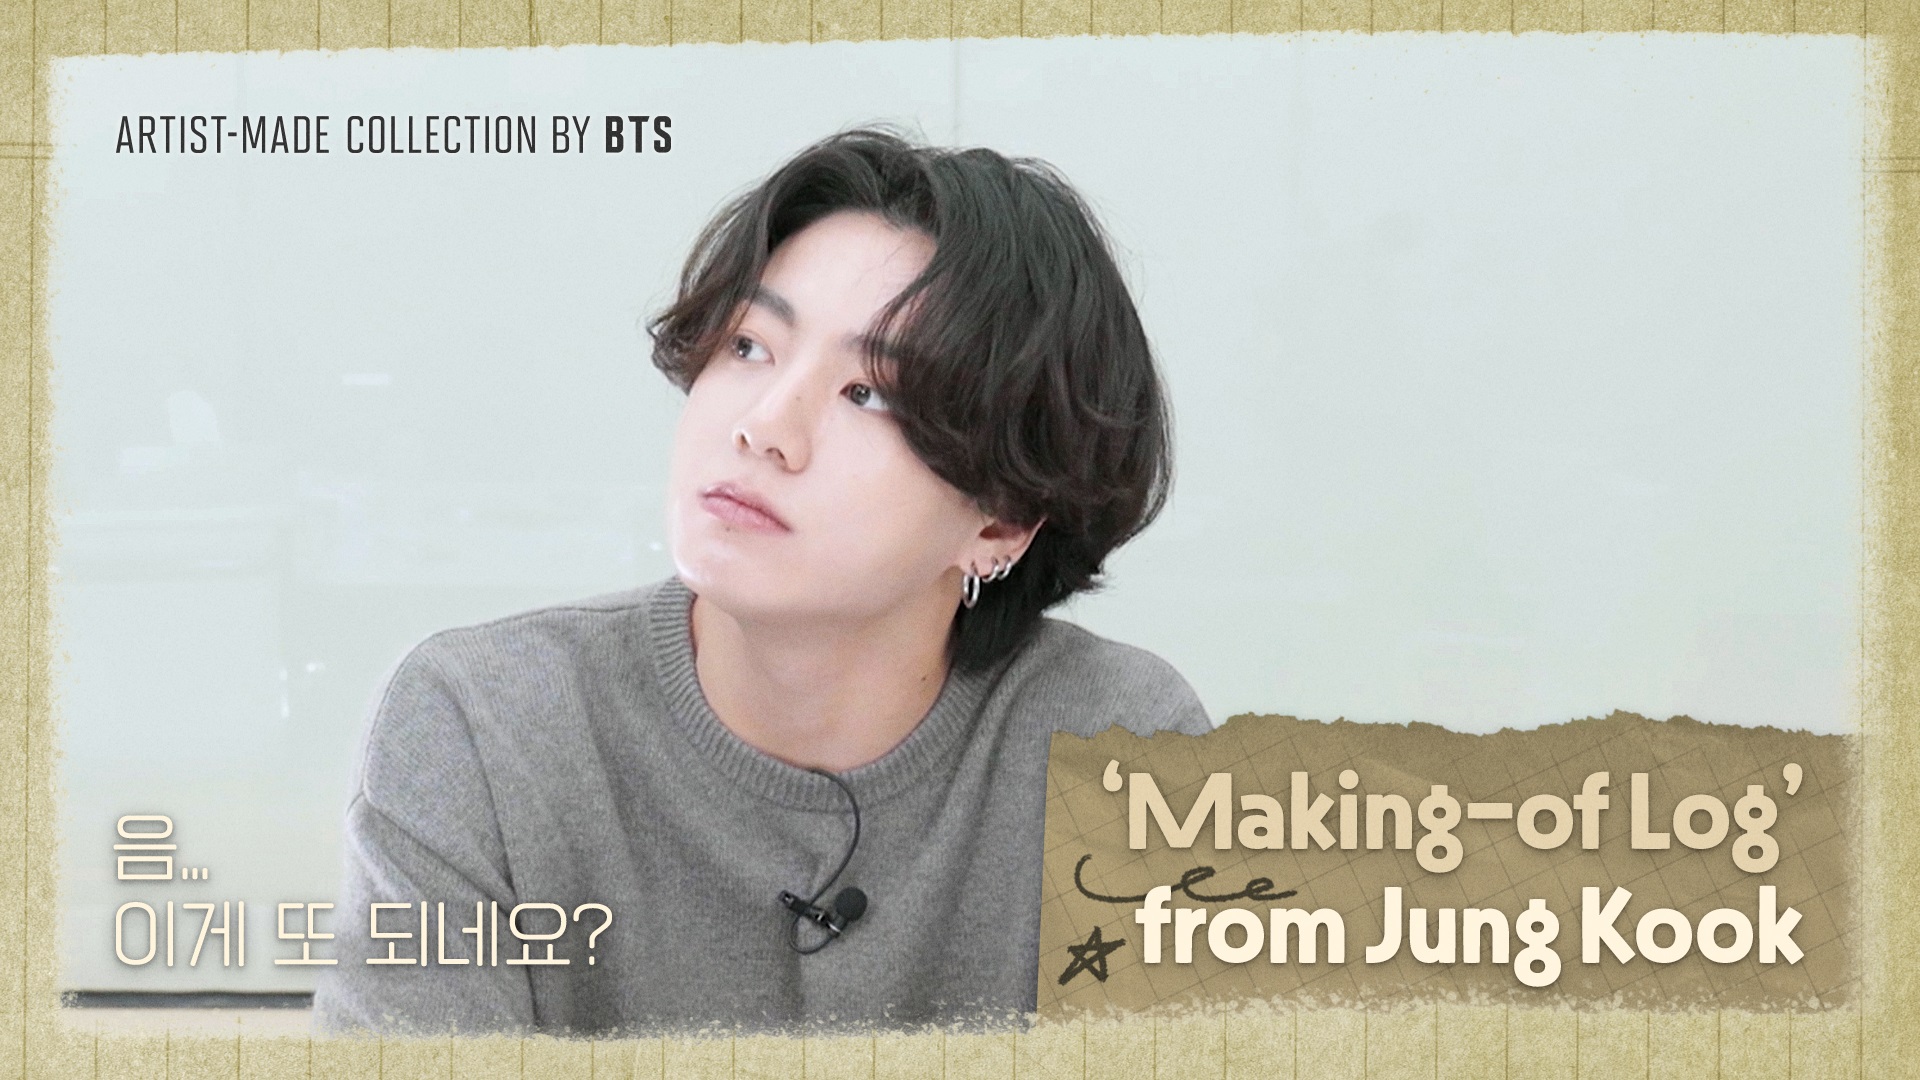 ARTIST-MADE COLLECTION BY BTS 'Making-of Log' from Jung Kook